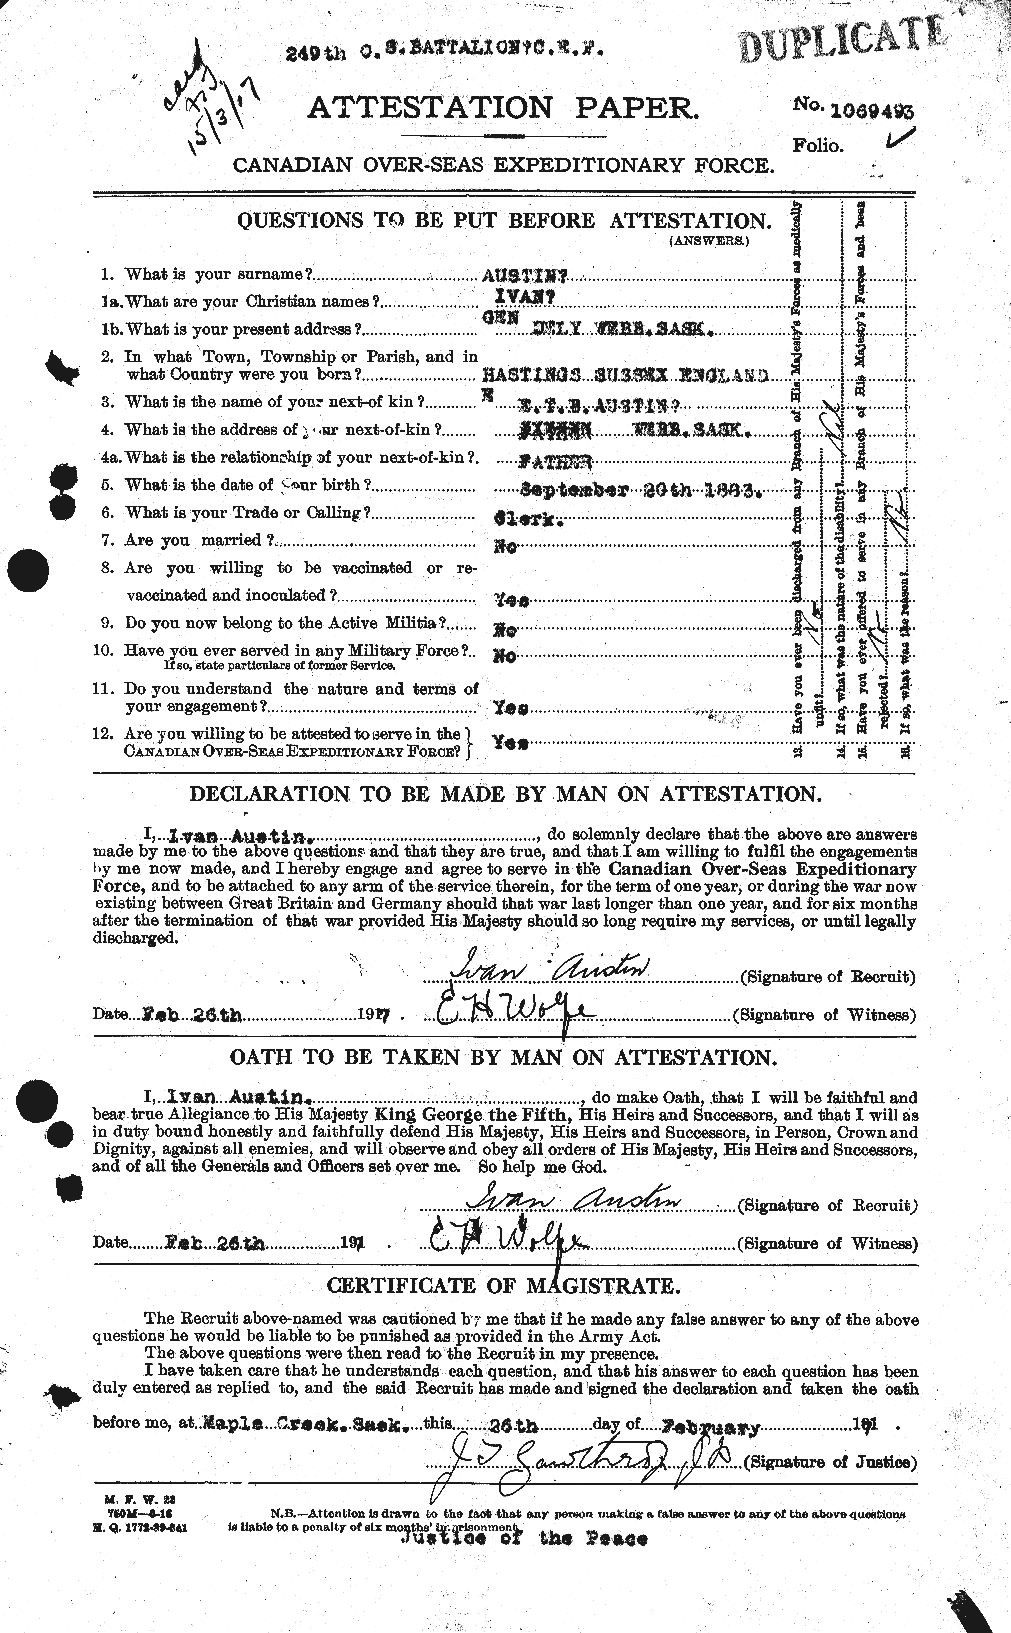 Personnel Records of the First World War - CEF 215351a